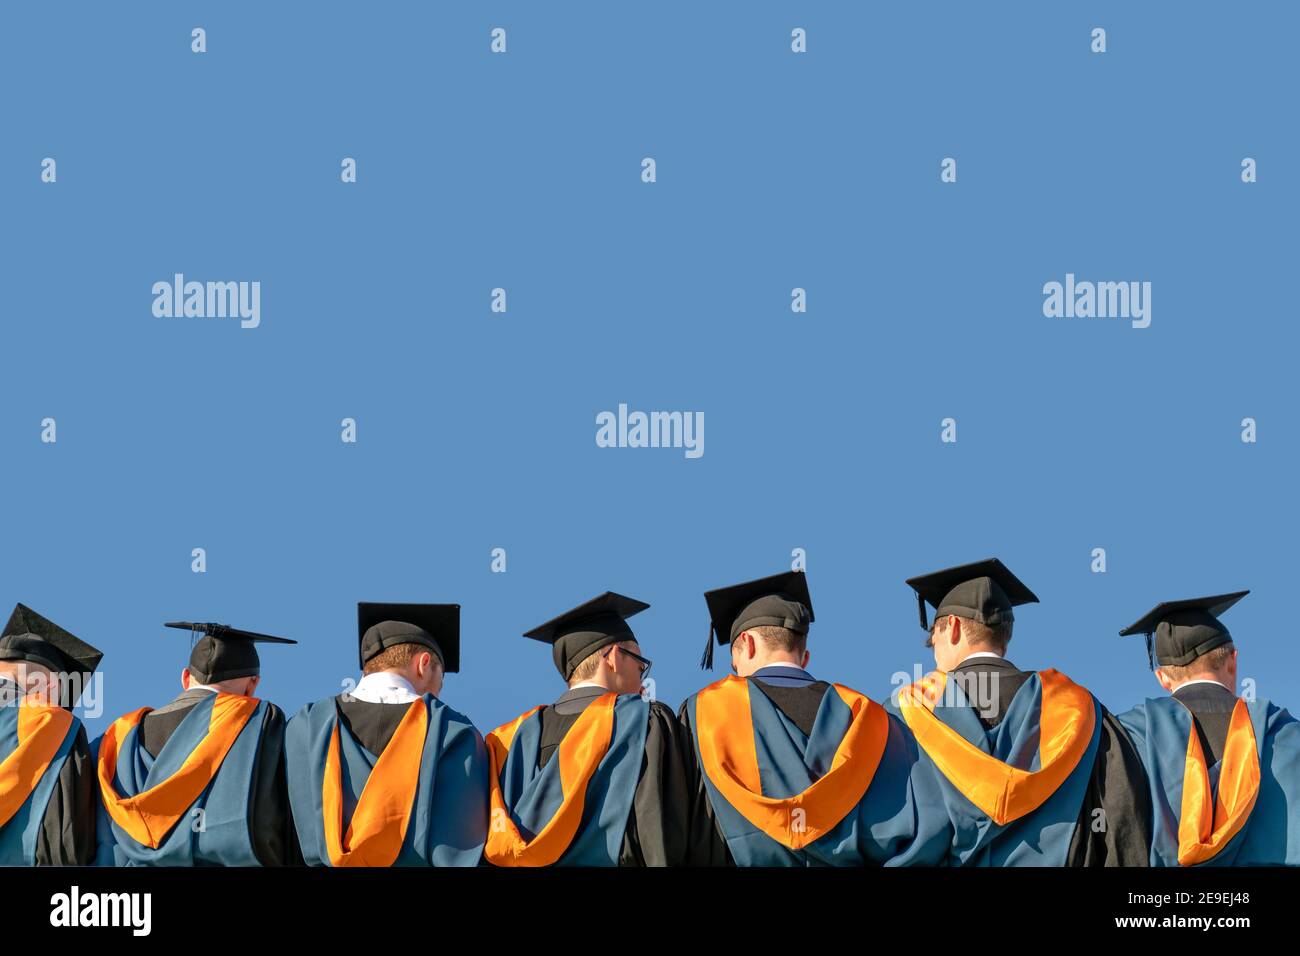 A line of graduates, dressed in gowns and mortar boards, wait in line during their graduation ceremony. Stock Photo